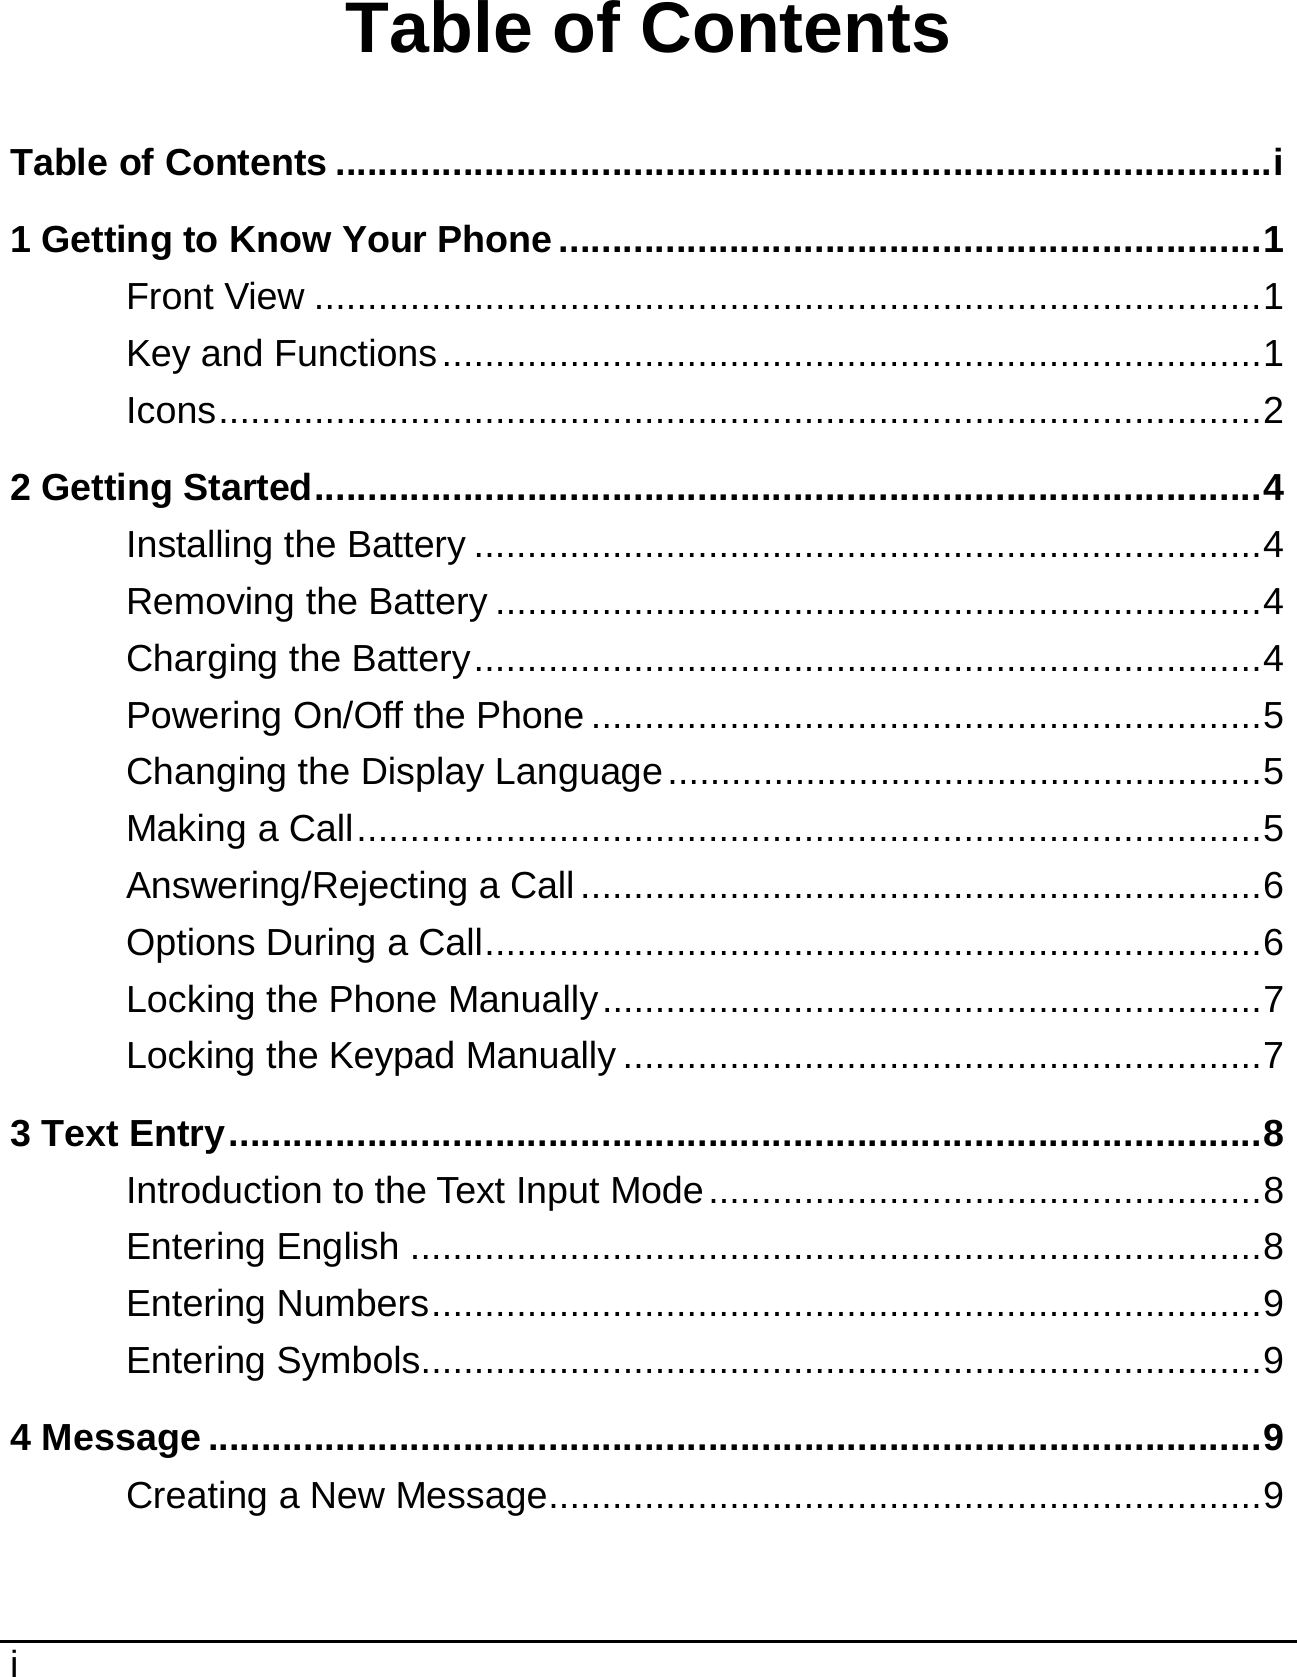   i  Table of Contents Table of Contents ........................................................................................i 1 Getting to Know Your Phone ..................................................................1 Front View .........................................................................................1 Key and Functions.............................................................................1 Icons..................................................................................................2 2 Getting Started.........................................................................................4 Installing the Battery ..........................................................................4 Removing the Battery ........................................................................4 Charging the Battery..........................................................................4 Powering On/Off the Phone ...............................................................5 Changing the Display Language........................................................5 Making a Call.....................................................................................5 Answering/Rejecting a Call................................................................6 Options During a Call.........................................................................6 Locking the Phone Manually..............................................................7 Locking the Keypad Manually ............................................................7 3 Text Entry.................................................................................................8 Introduction to the Text Input Mode....................................................8 Entering English ................................................................................8 Entering Numbers..............................................................................9 Entering Symbols...............................................................................9 4 Message ...................................................................................................9 Creating a New Message...................................................................9 